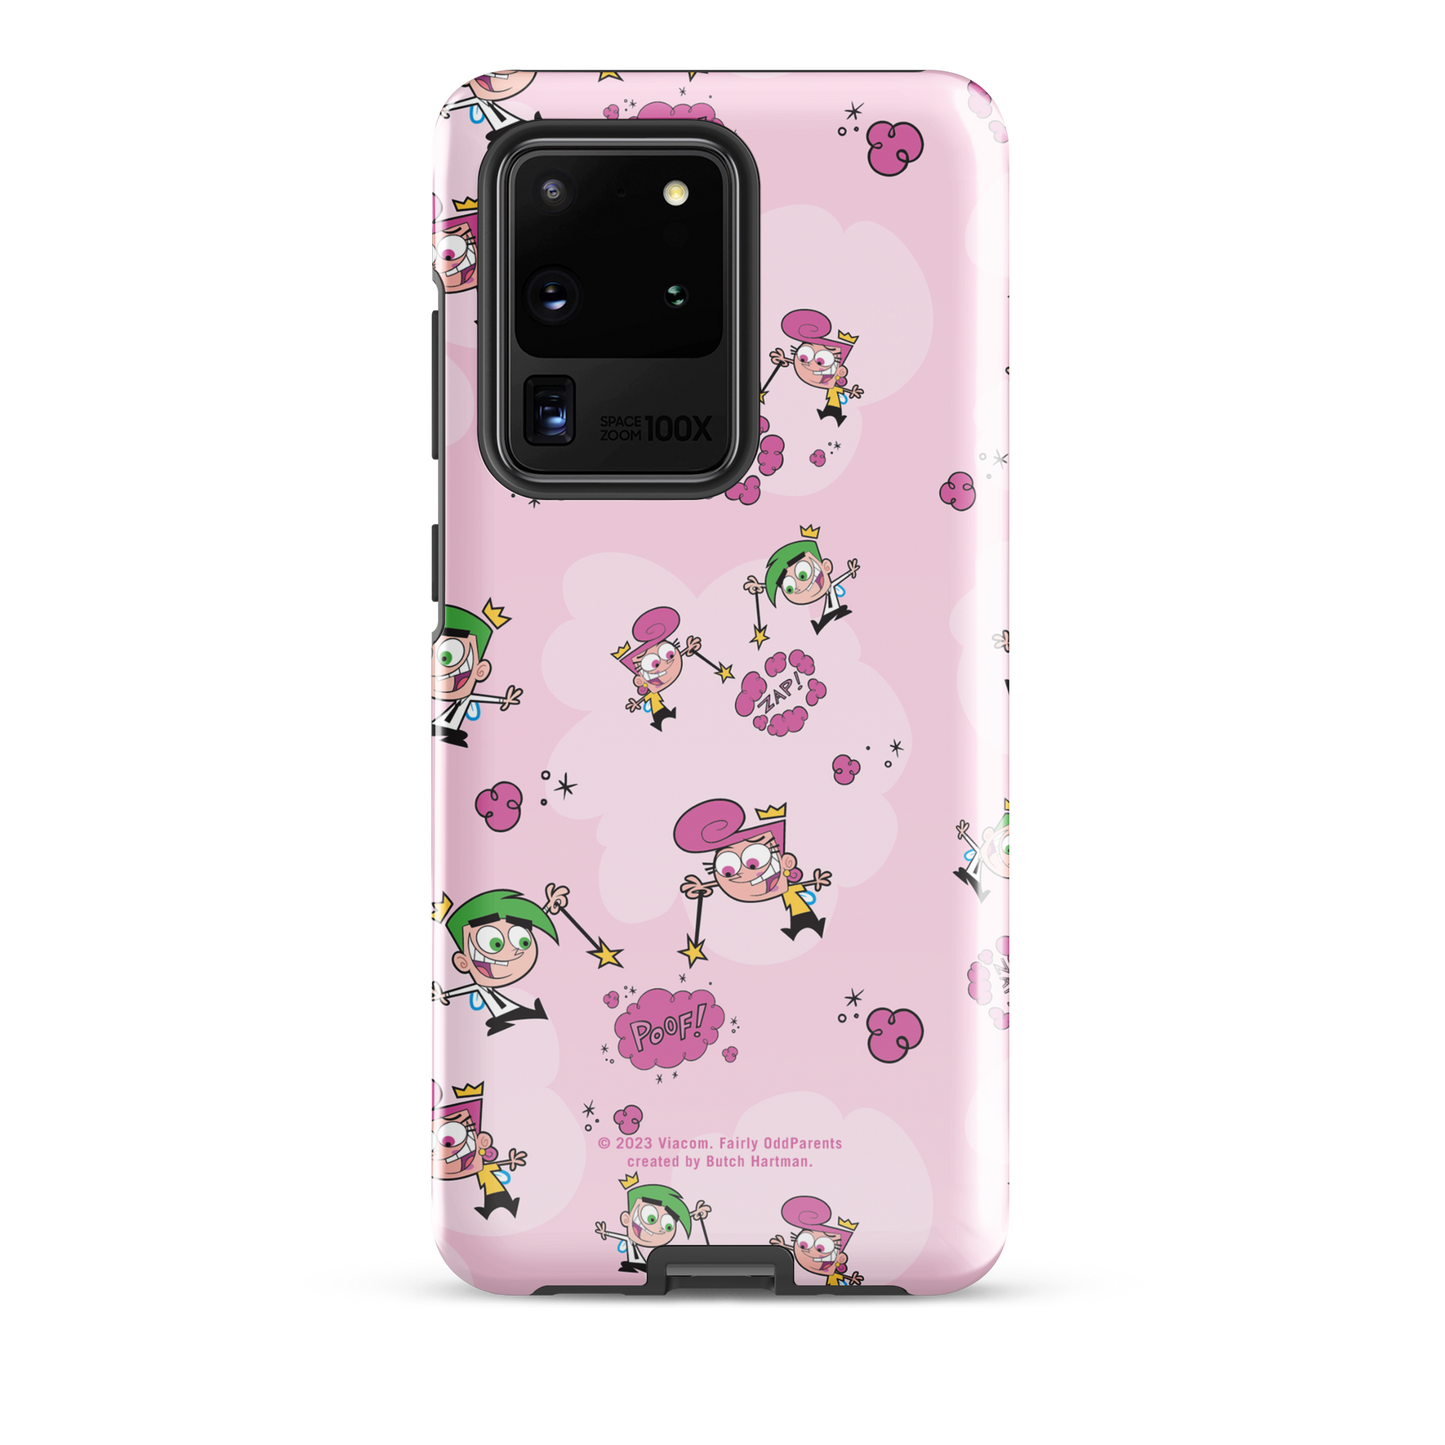 The Fairly OddParents ¡Zap! Pattern Tough Phone Case - Samsung